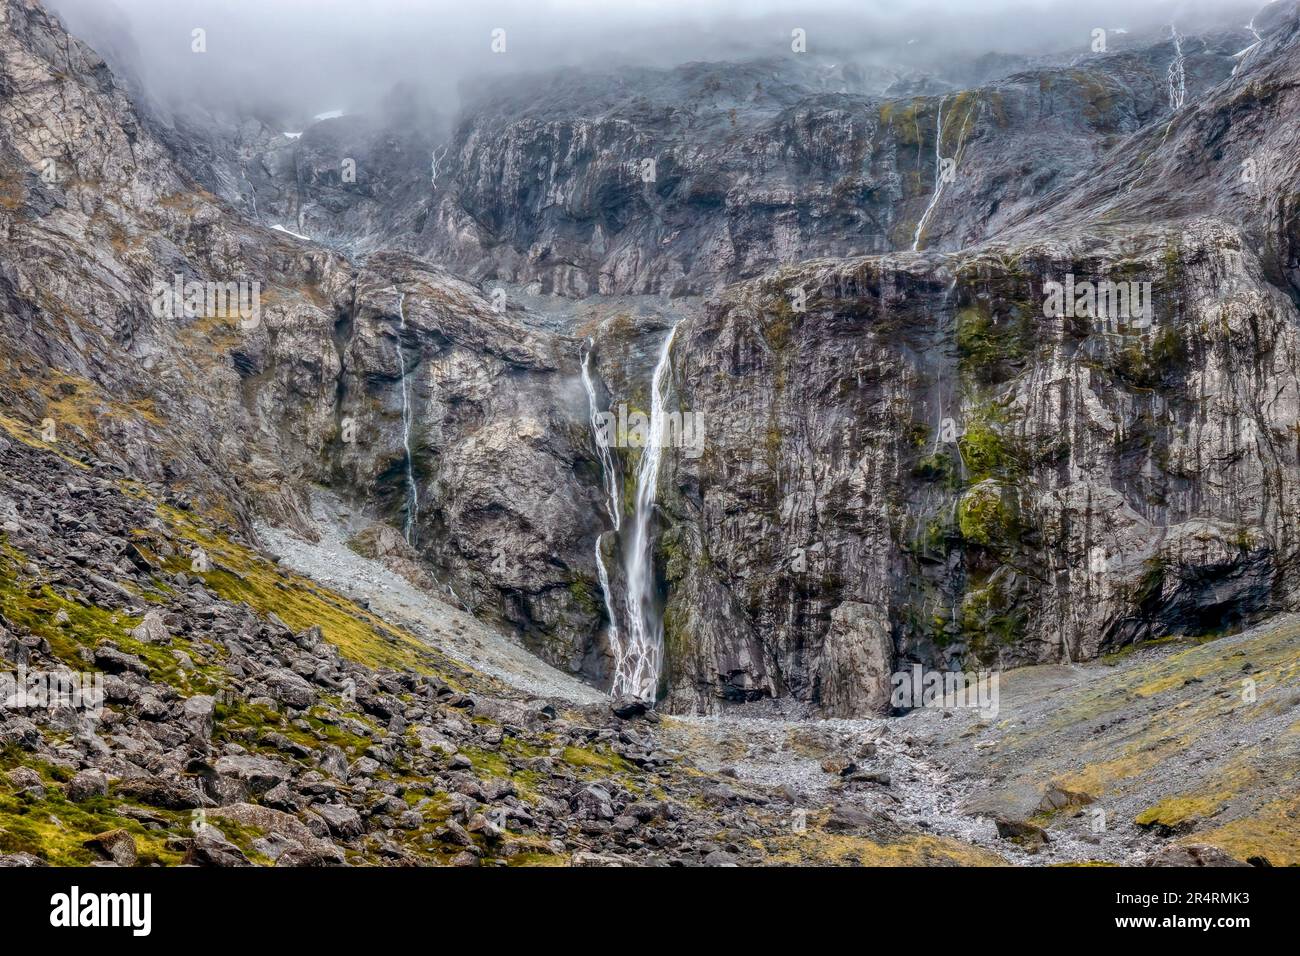 Waterfalls, mist and rain over a steep wall of granite on the South Island of New Zealand, near the entrance to the Homer Tunnel near Milford Sound. Stock Photo